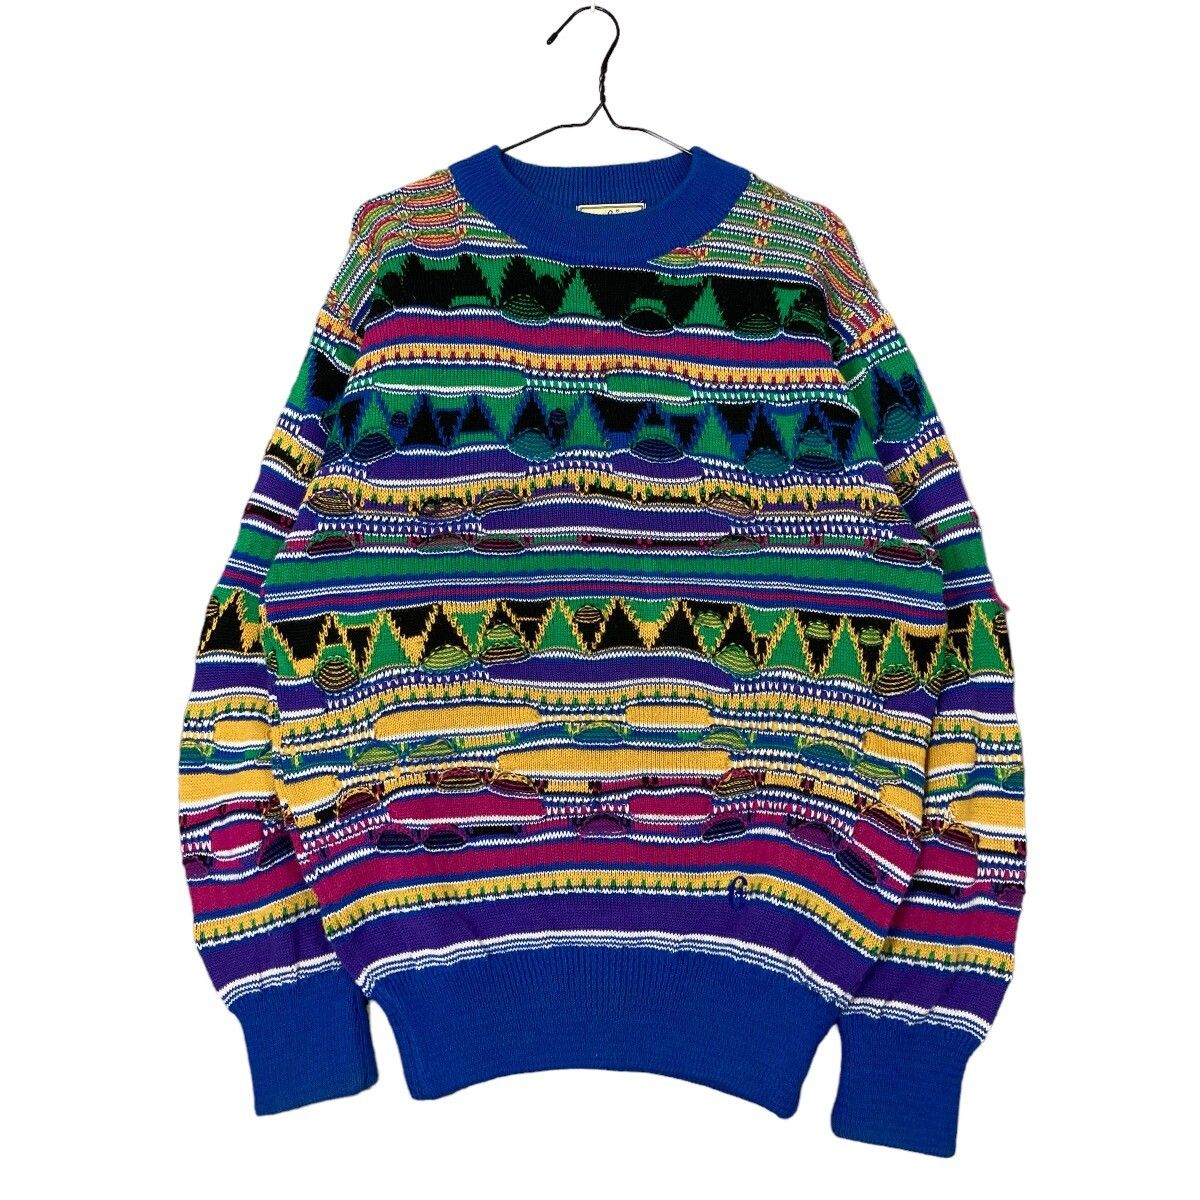 Vintage Crazy Vintage 90s Coogi Style 3D Knit Heavy Weight Sweater Size US L / EU 52-54 / 3 - 1 Preview